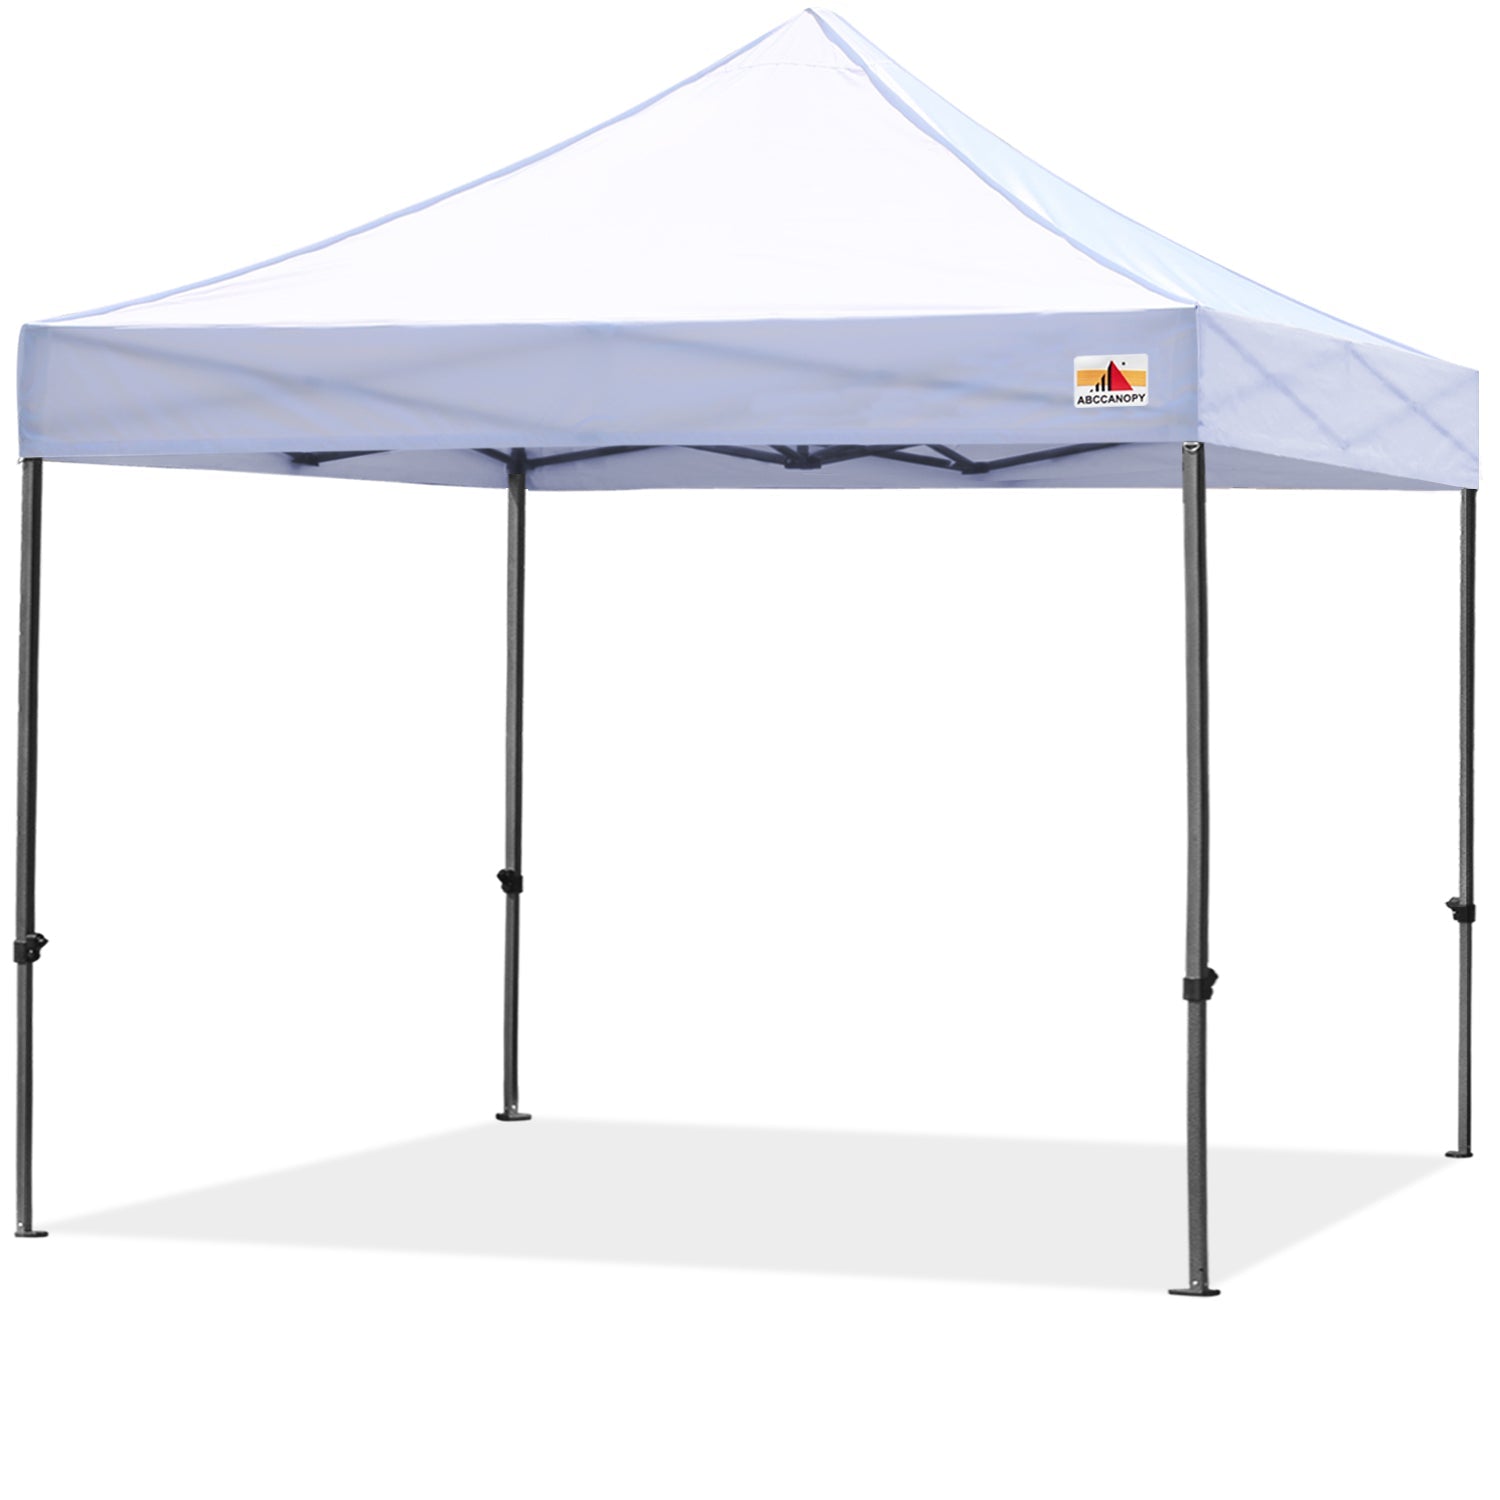 S1 Commercial Durable Easy Pop Up Canopy Tent 10x10 Instant Shelter